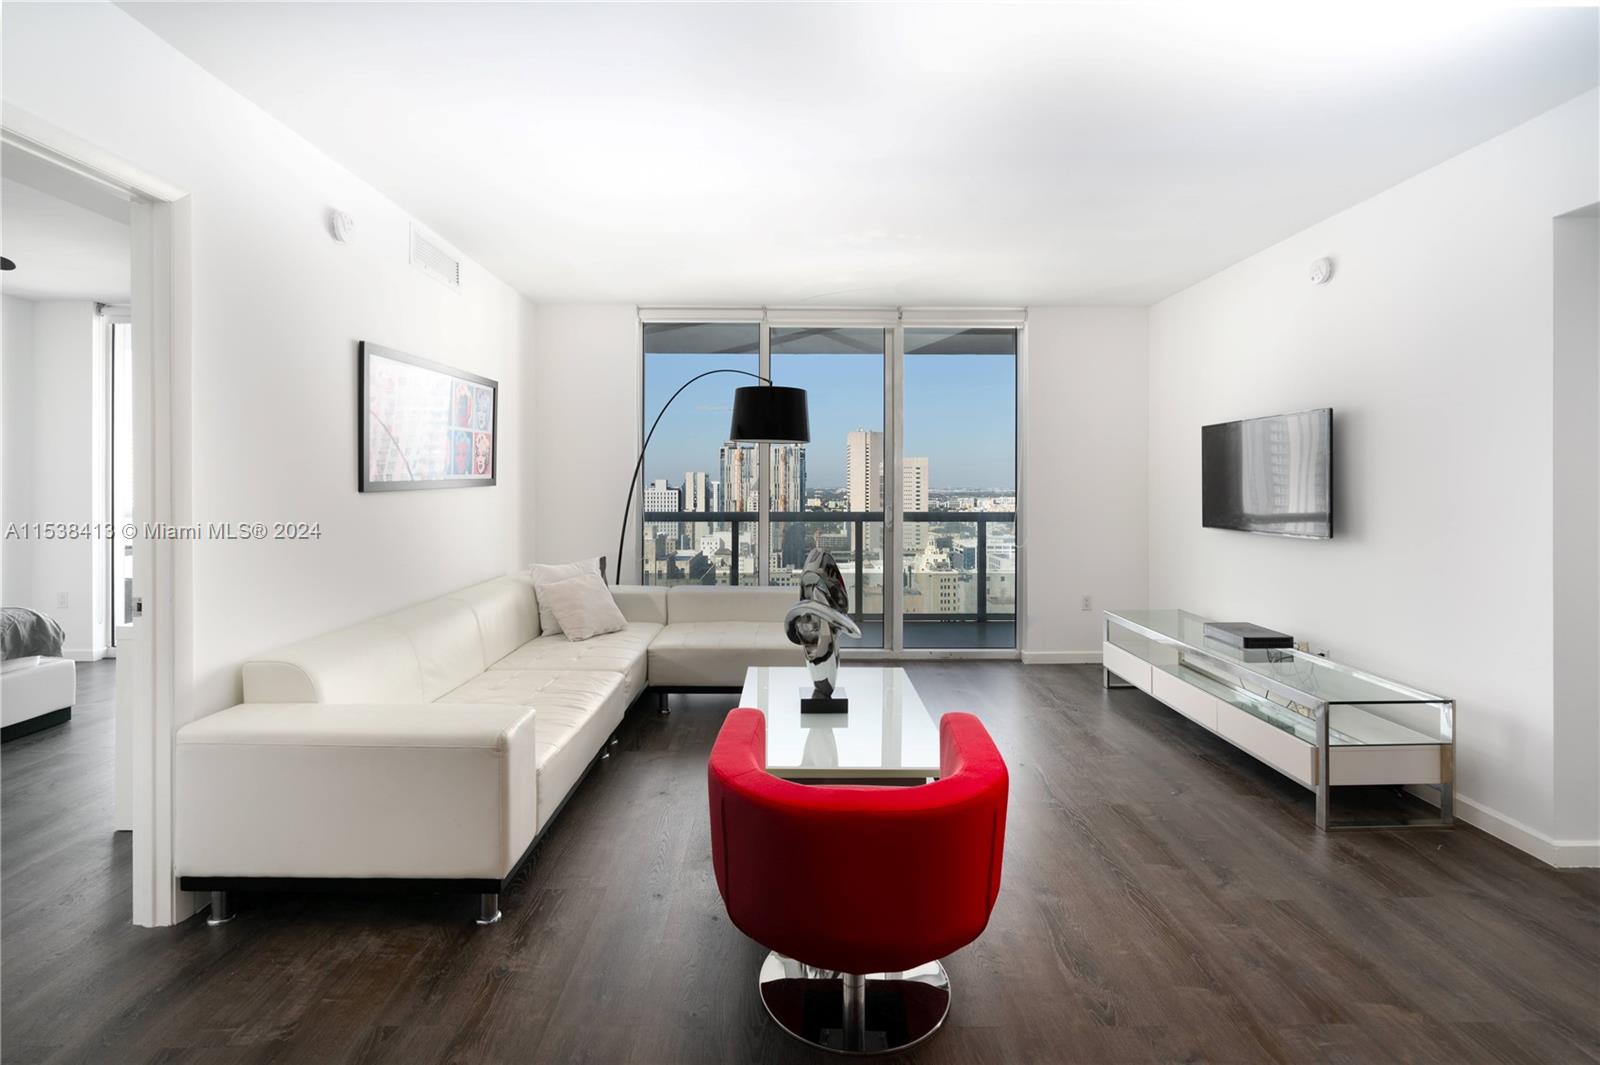 Funished 2 Bedroom and 2 bathroom, corner unit located in the 32nd floor. Wraparound terrace with City and bay views. 24 hour concierge and security, valet parking, gym, sauna, yoga and pilates room. Rent includes cable, Internet and water.